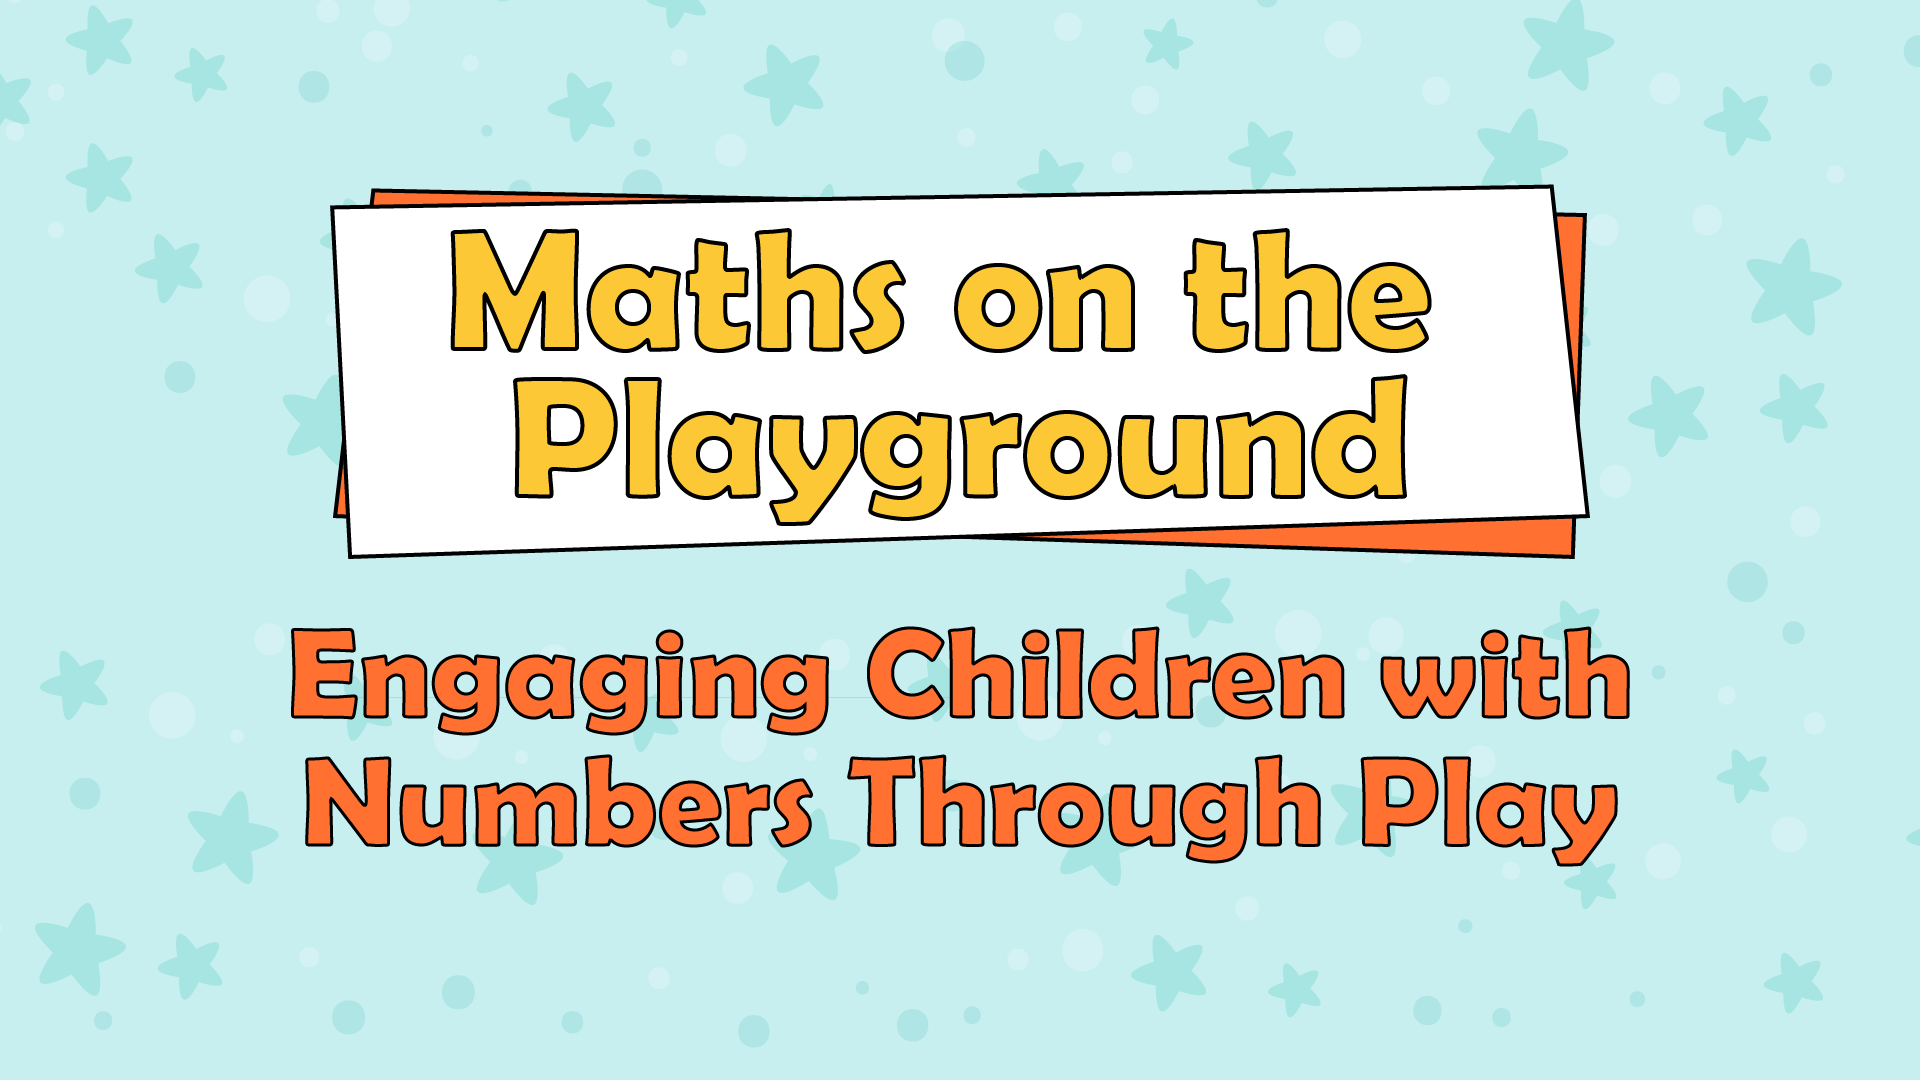 Maths on the Playground: Engaging Children with Numbers Through Play